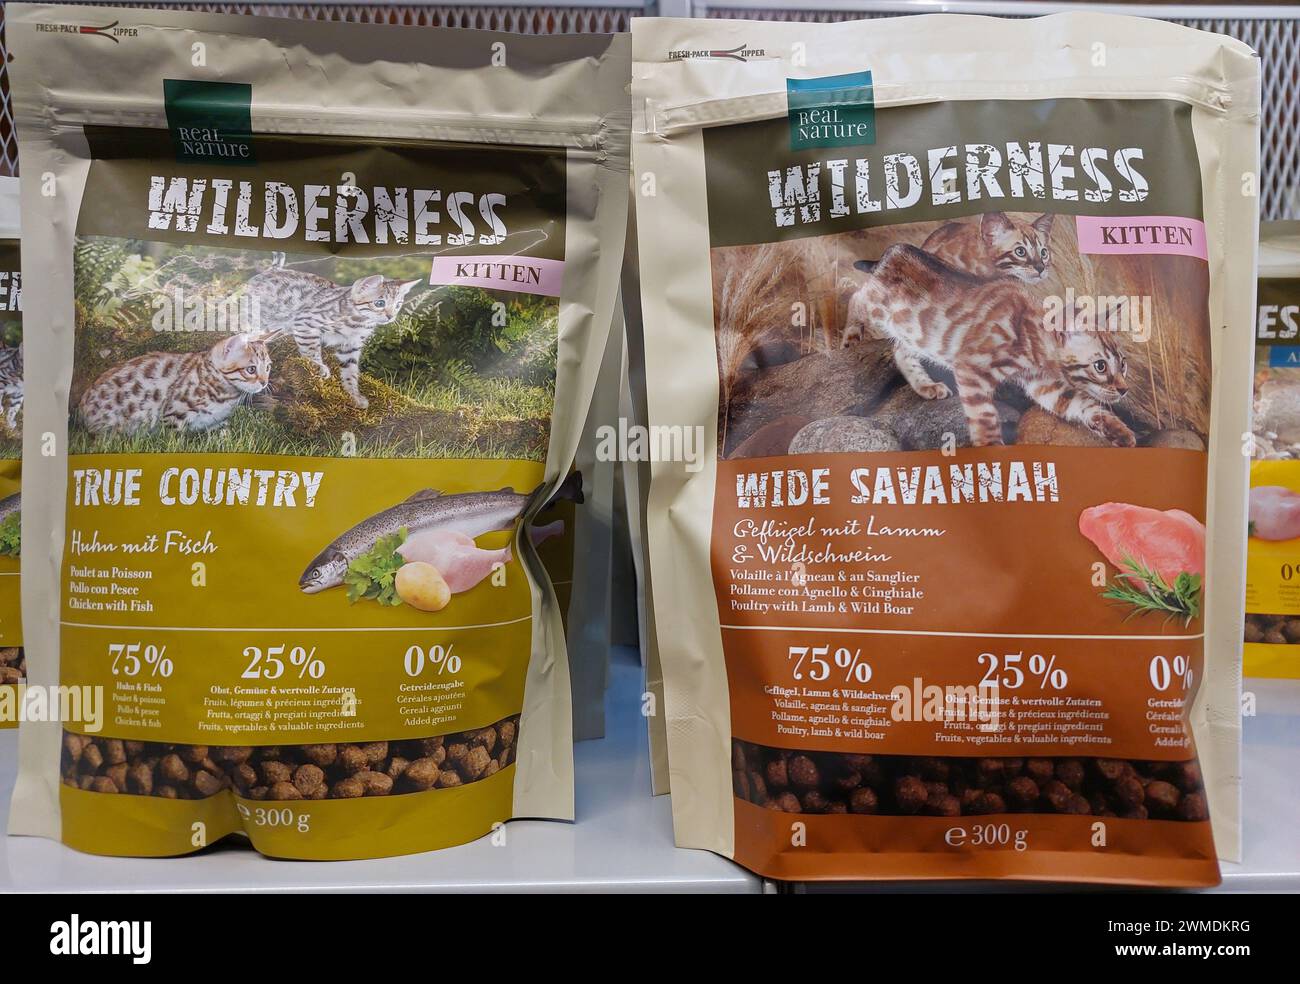 Wilderness cat food packs in a pet shop Stock Photo